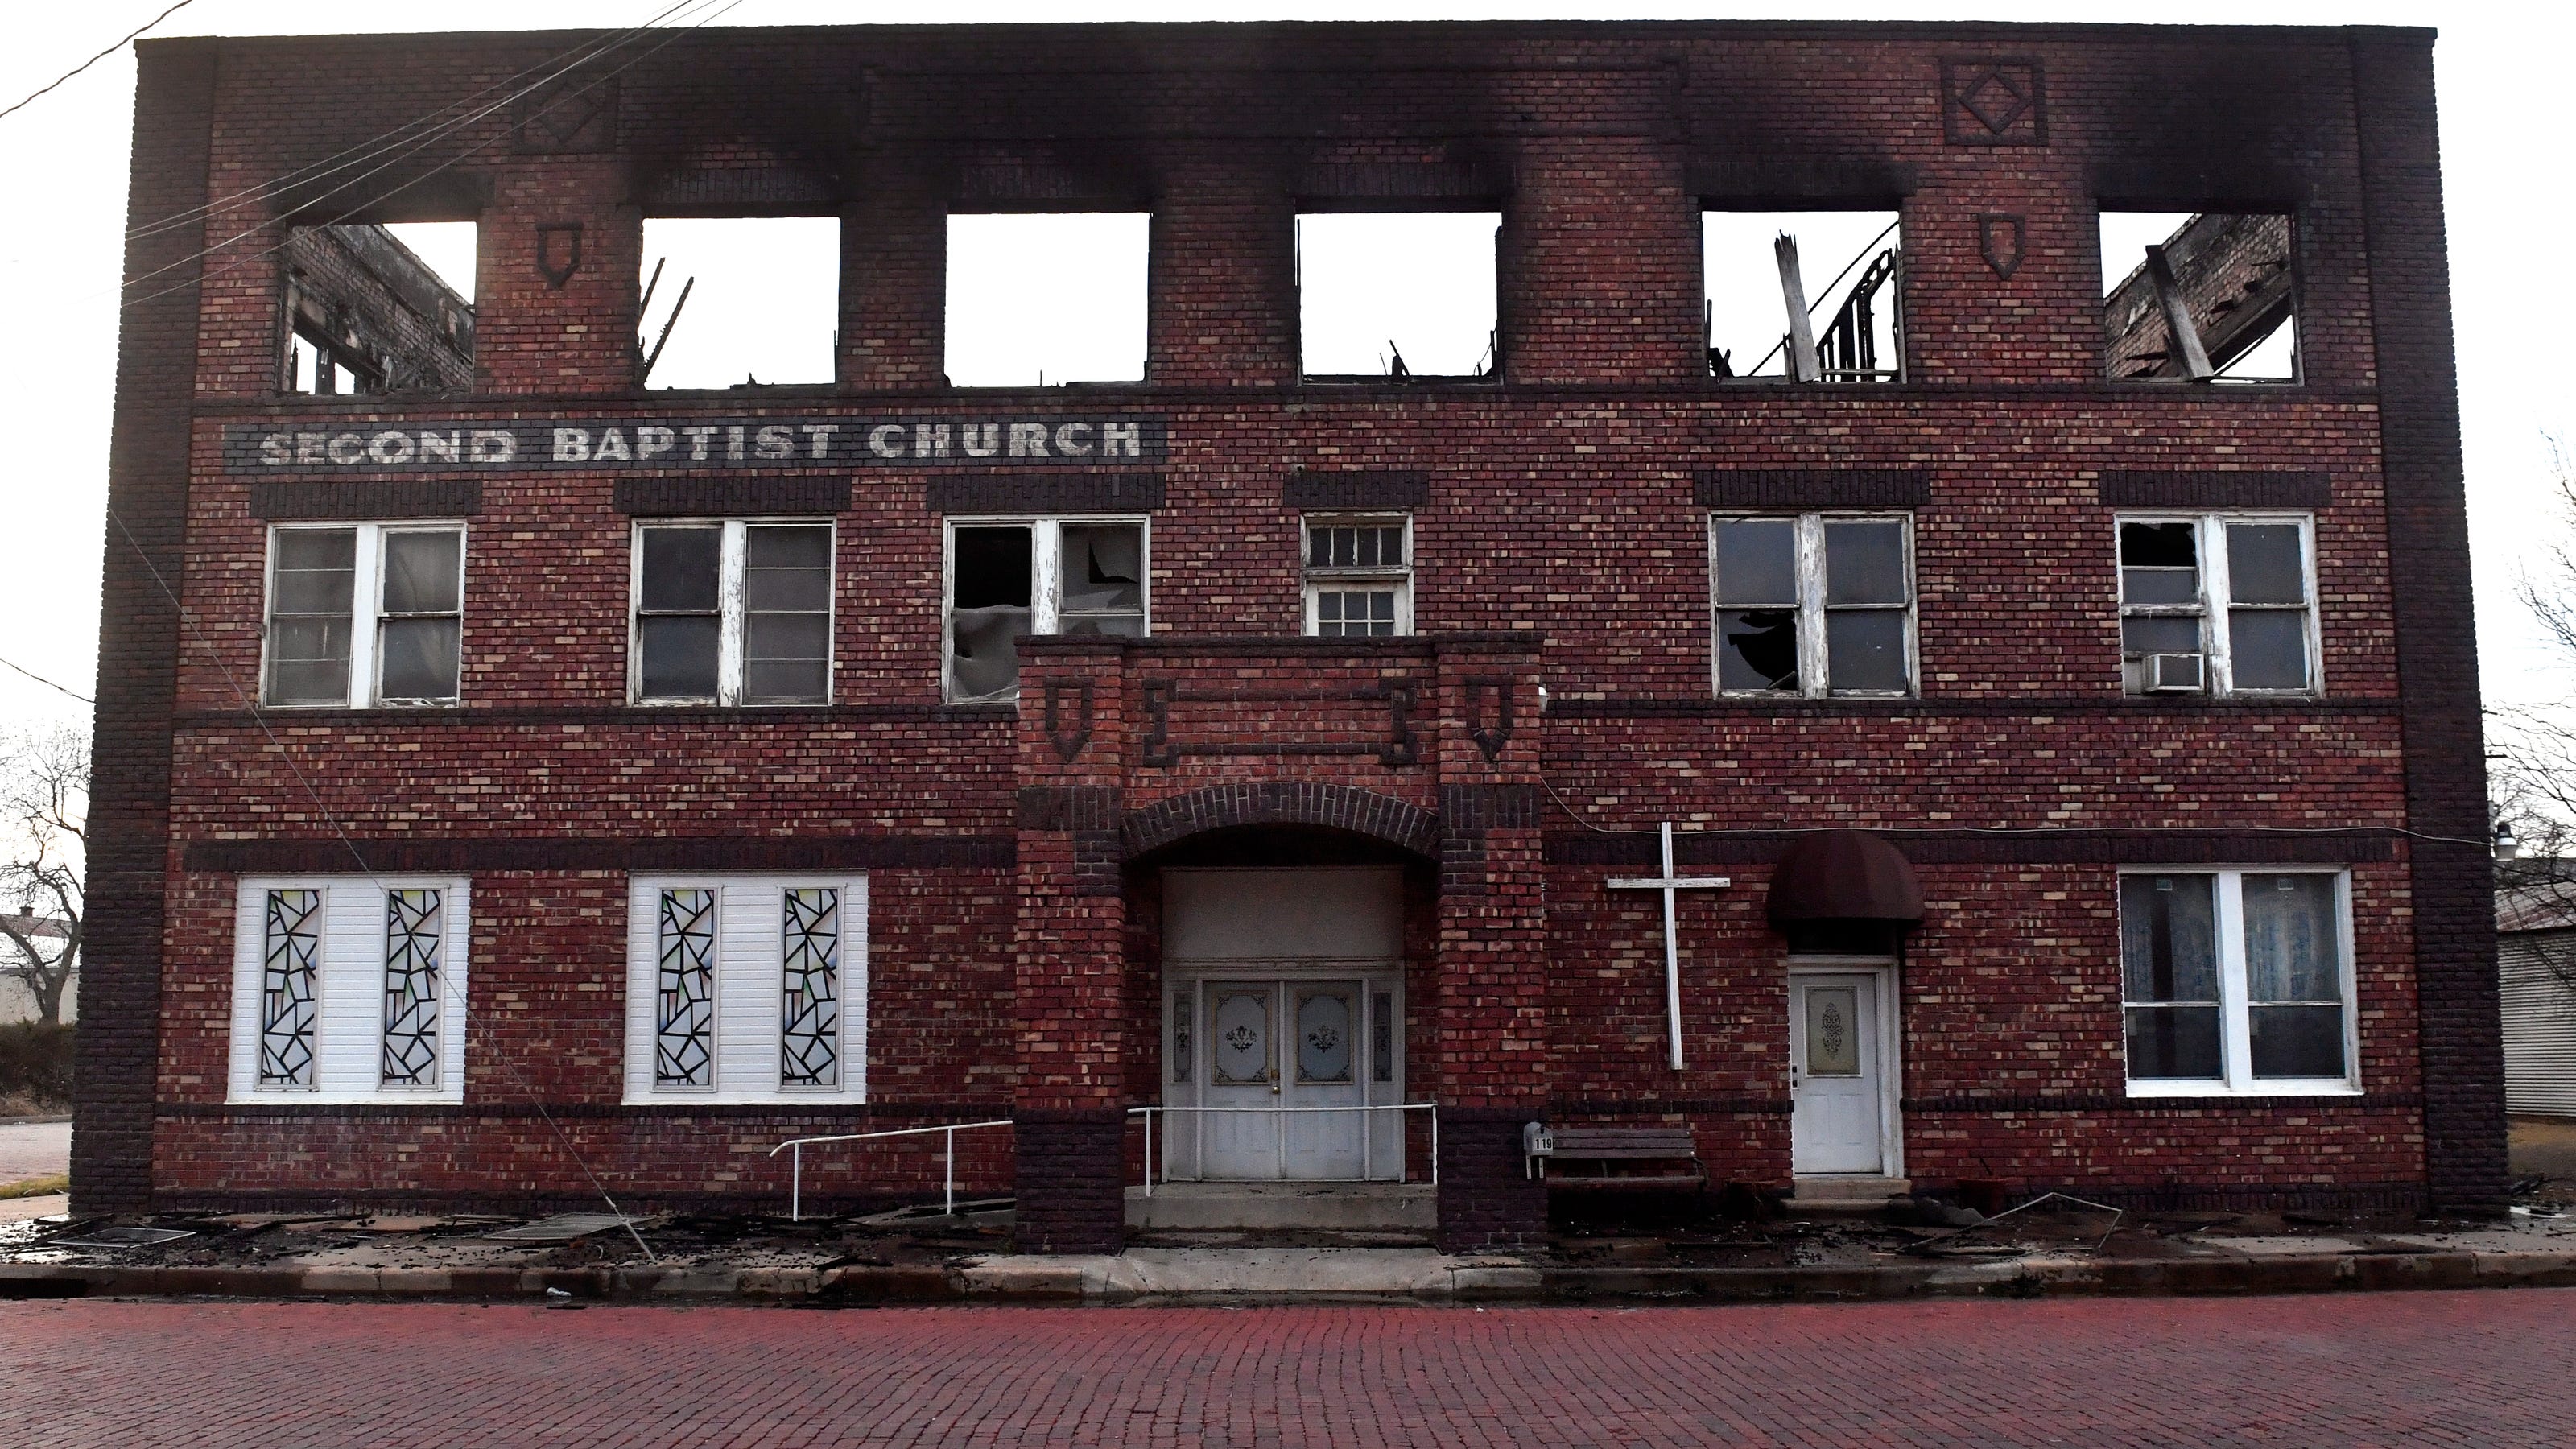  Ranger's Second Baptist Church, damaged in series of fires, plans to rise again 